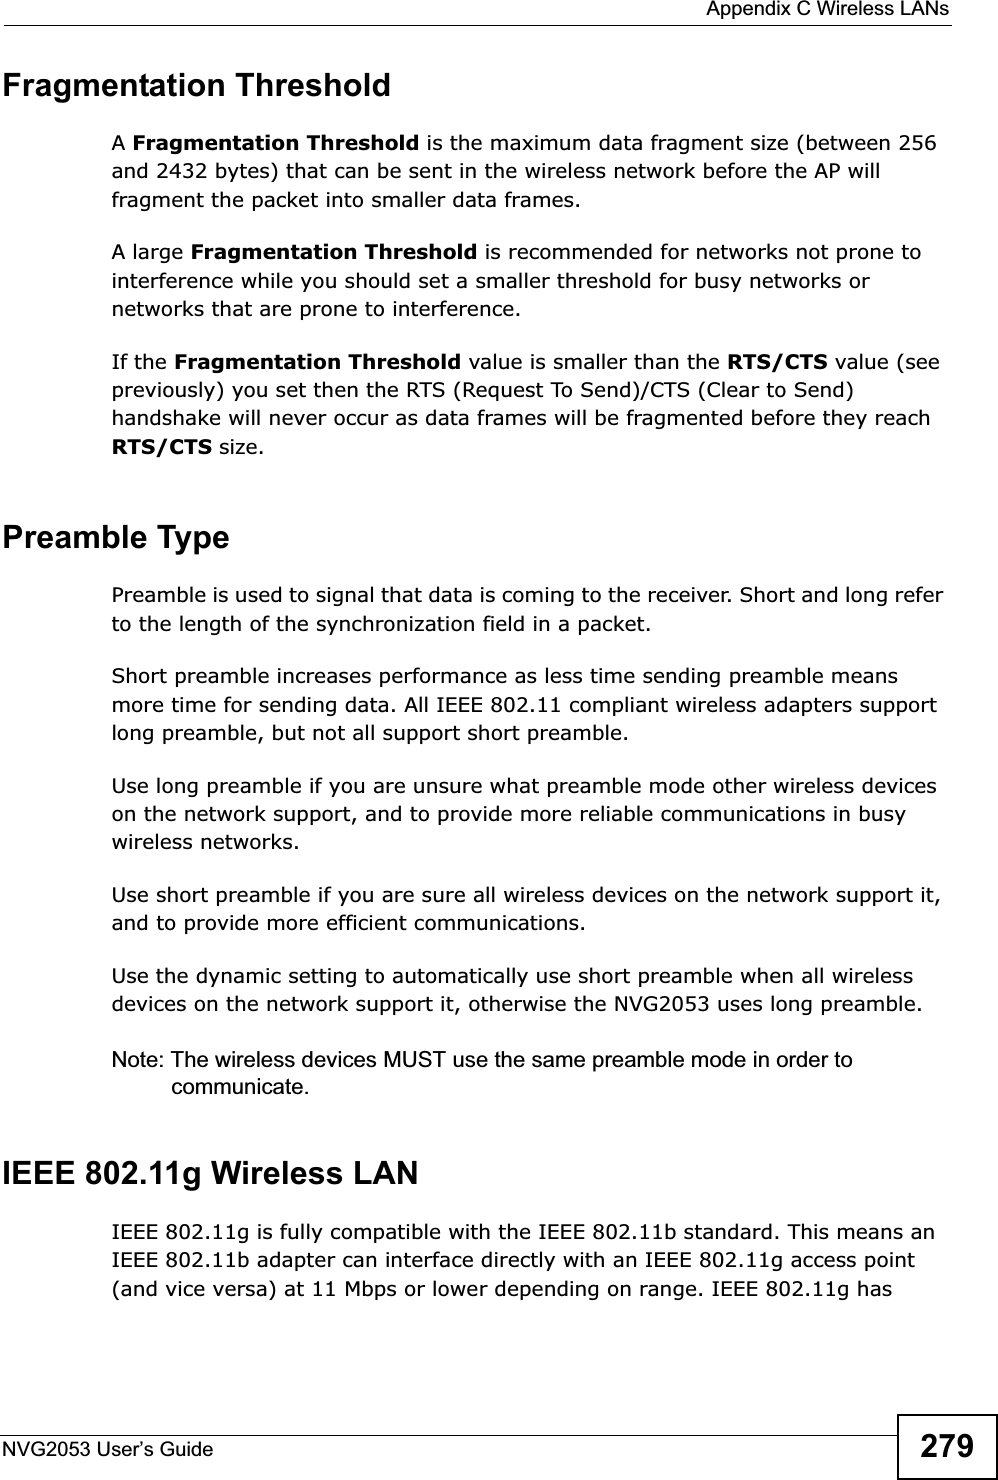  Appendix C Wireless LANsNVG2053 User’s Guide 279Fragmentation ThresholdAFragmentation Threshold is the maximum data fragment size (between 256 and 2432 bytes) that can be sent in the wireless network before the AP will fragment the packet into smaller data frames.A large Fragmentation Threshold is recommended for networks not prone to interference while you should set a smaller threshold for busy networks or networks that are prone to interference.If the Fragmentation Threshold value is smaller than the RTS/CTS value (see previously) you set then the RTS (Request To Send)/CTS (Clear to Send) handshake will never occur as data frames will be fragmented before they reach RTS/CTS size.Preamble TypePreamble is used to signal that data is coming to the receiver. Short and long refer to the length of the synchronization field in a packet.Short preamble increases performance as less time sending preamble means more time for sending data. All IEEE 802.11 compliant wireless adapters support long preamble, but not all support short preamble. Use long preamble if you are unsure what preamble mode other wireless devices on the network support, and to provide more reliable communications in busy wireless networks. Use short preamble if you are sure all wireless devices on the network support it, and to provide more efficient communications.Use the dynamic setting to automatically use short preamble when all wireless devices on the network support it, otherwise the NVG2053 uses long preamble.Note: The wireless devices MUST use the same preamble mode in order to communicate.IEEE 802.11g Wireless LANIEEE 802.11g is fully compatible with the IEEE 802.11b standard. This means an IEEE 802.11b adapter can interface directly with an IEEE 802.11g access point (and vice versa) at 11 Mbps or lower depending on range. IEEE 802.11g has 